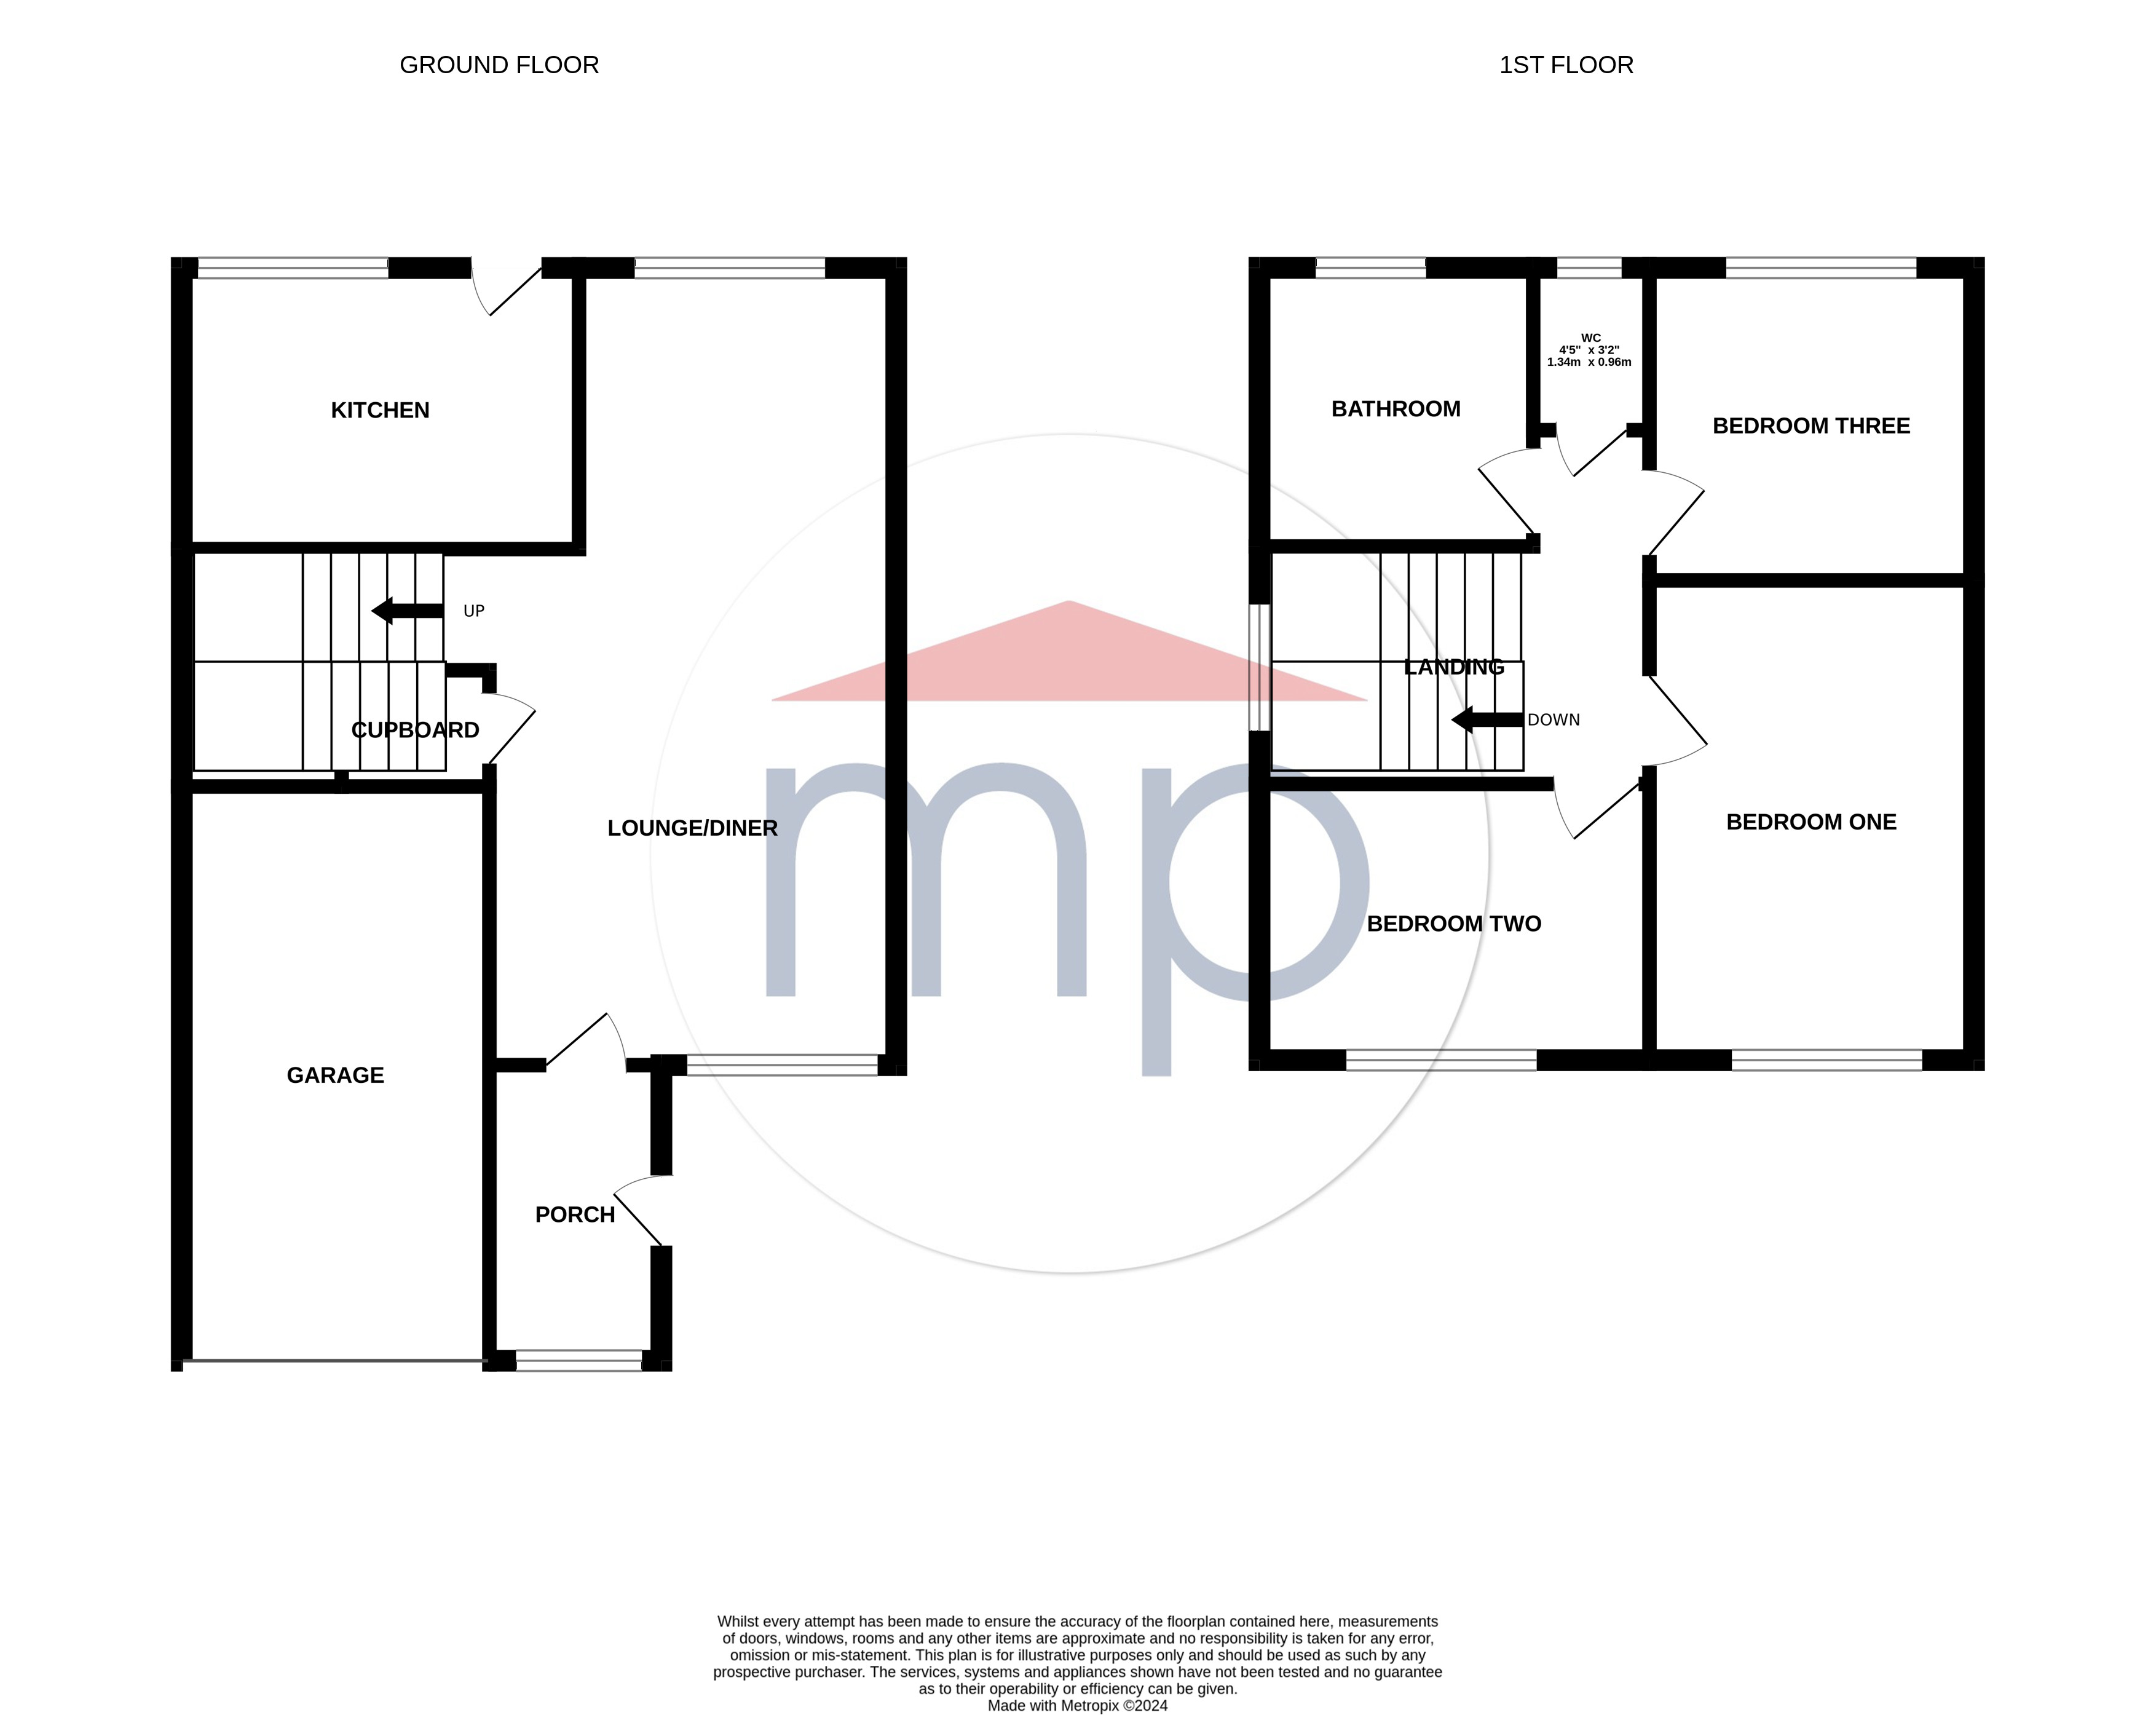 3 bed house to rent - Property floorplan